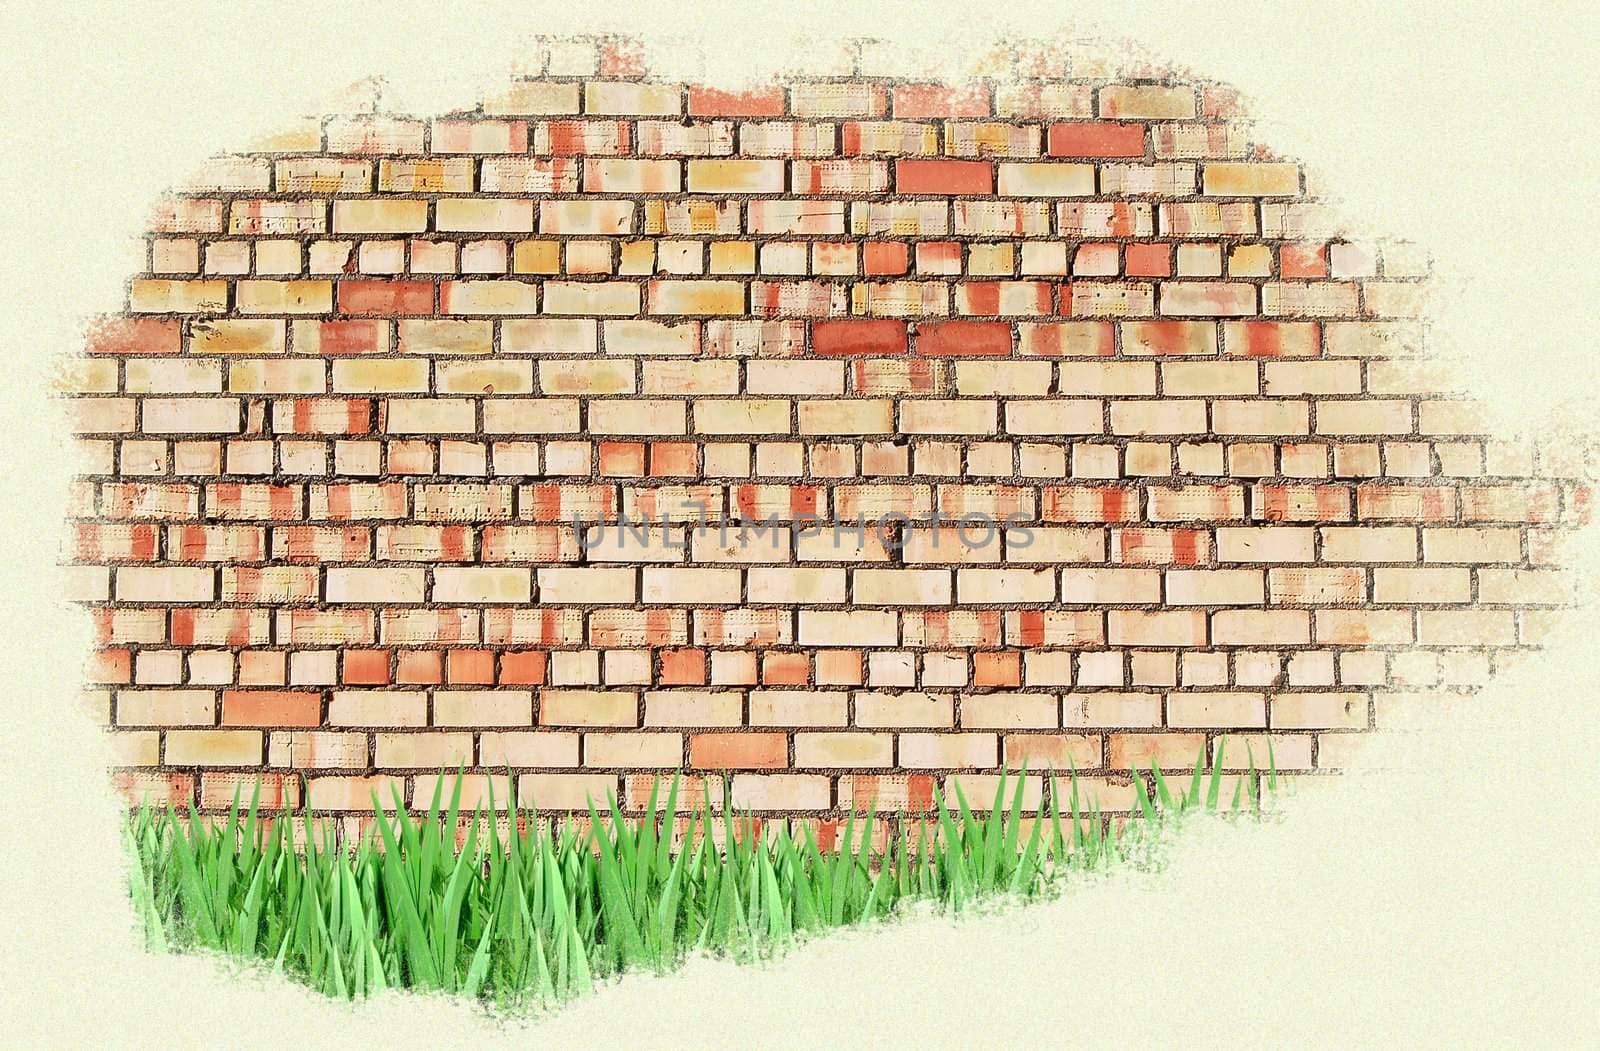 Old Brick Wall and New Green Grass by rufous